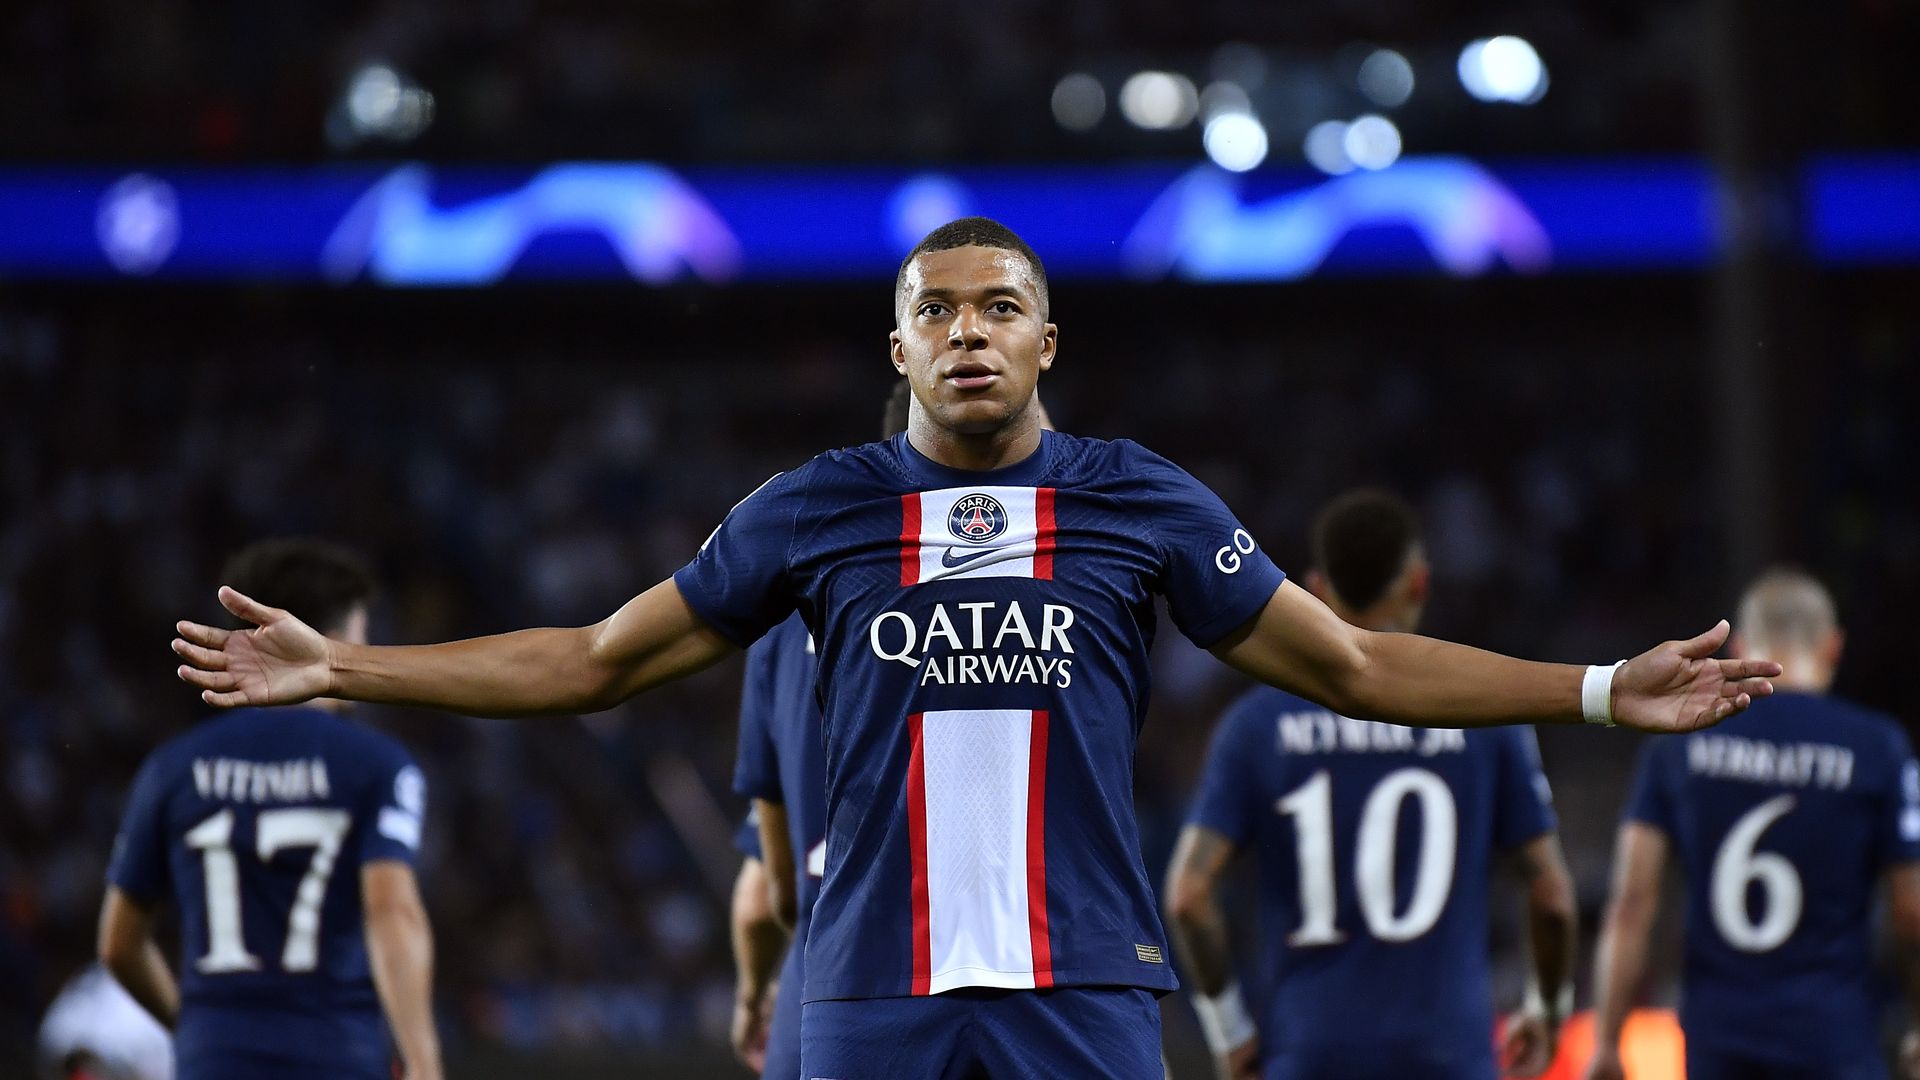 kylian mbappe arms outstretched